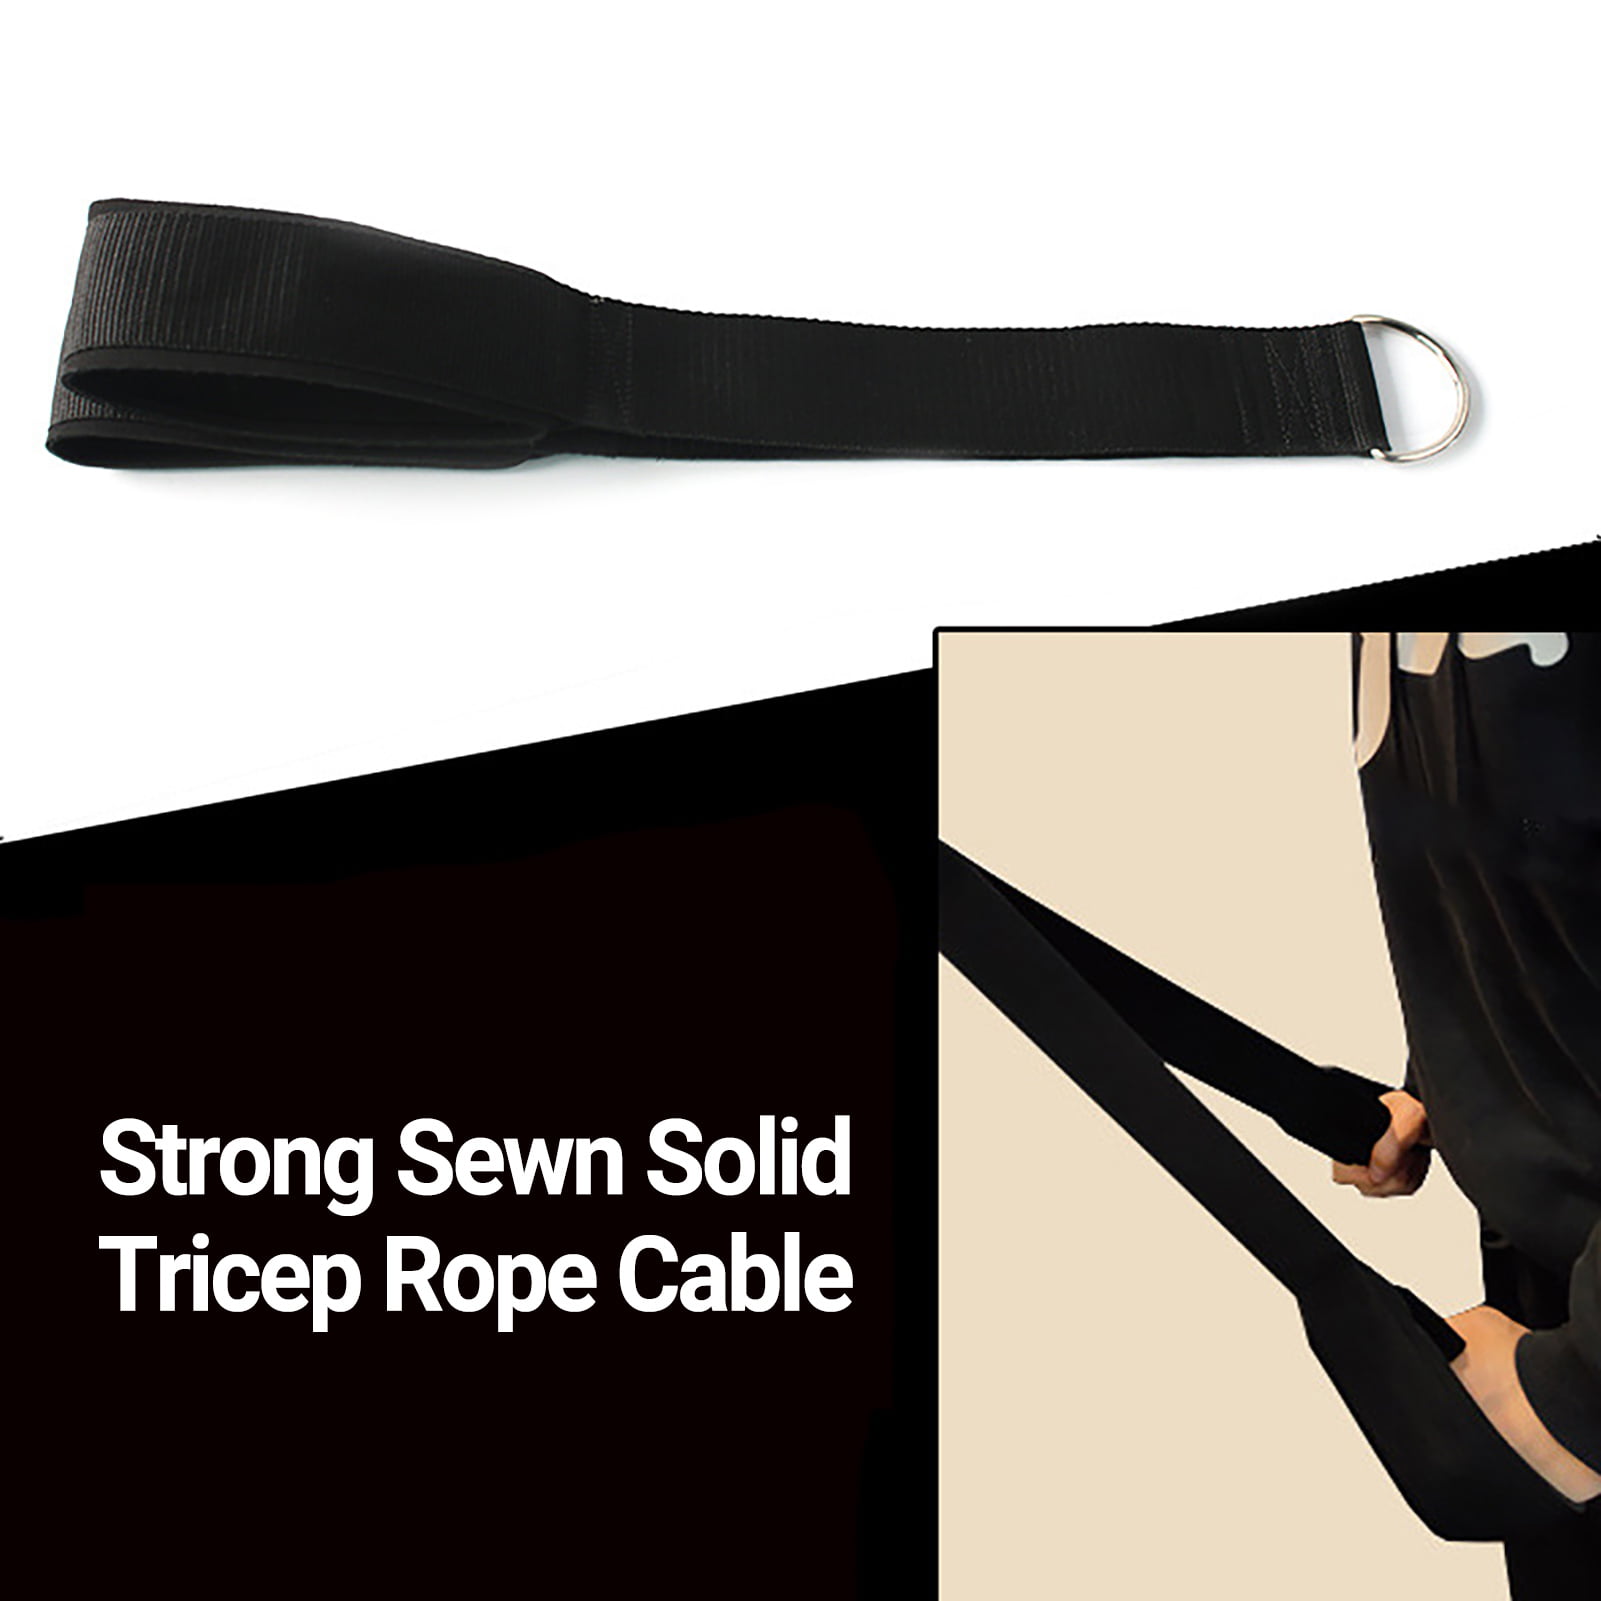 Details about   2x Tricep Rope Handle Cable Bar Attachment Resistance Exercise Home Gym Training 